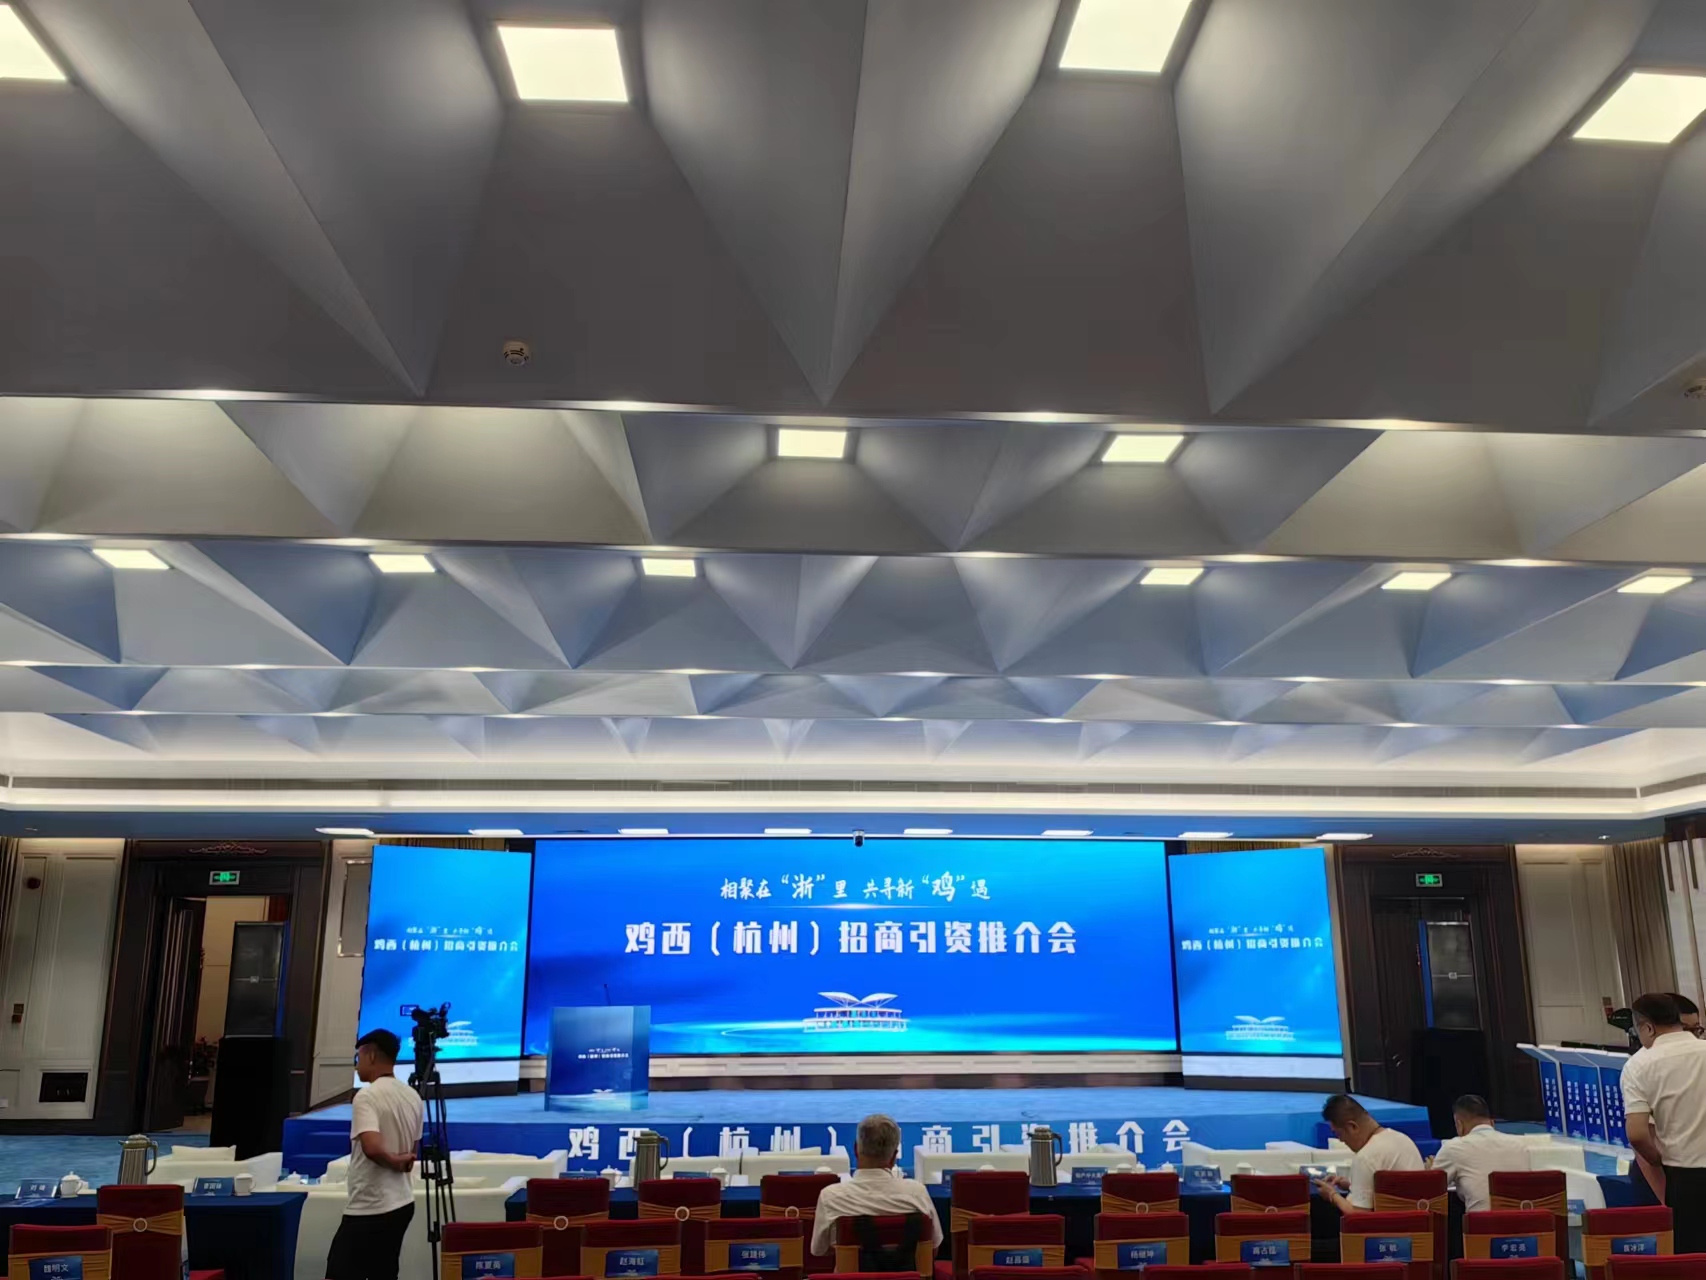 Jixi (Hangzhou) Investment Promotion Conference